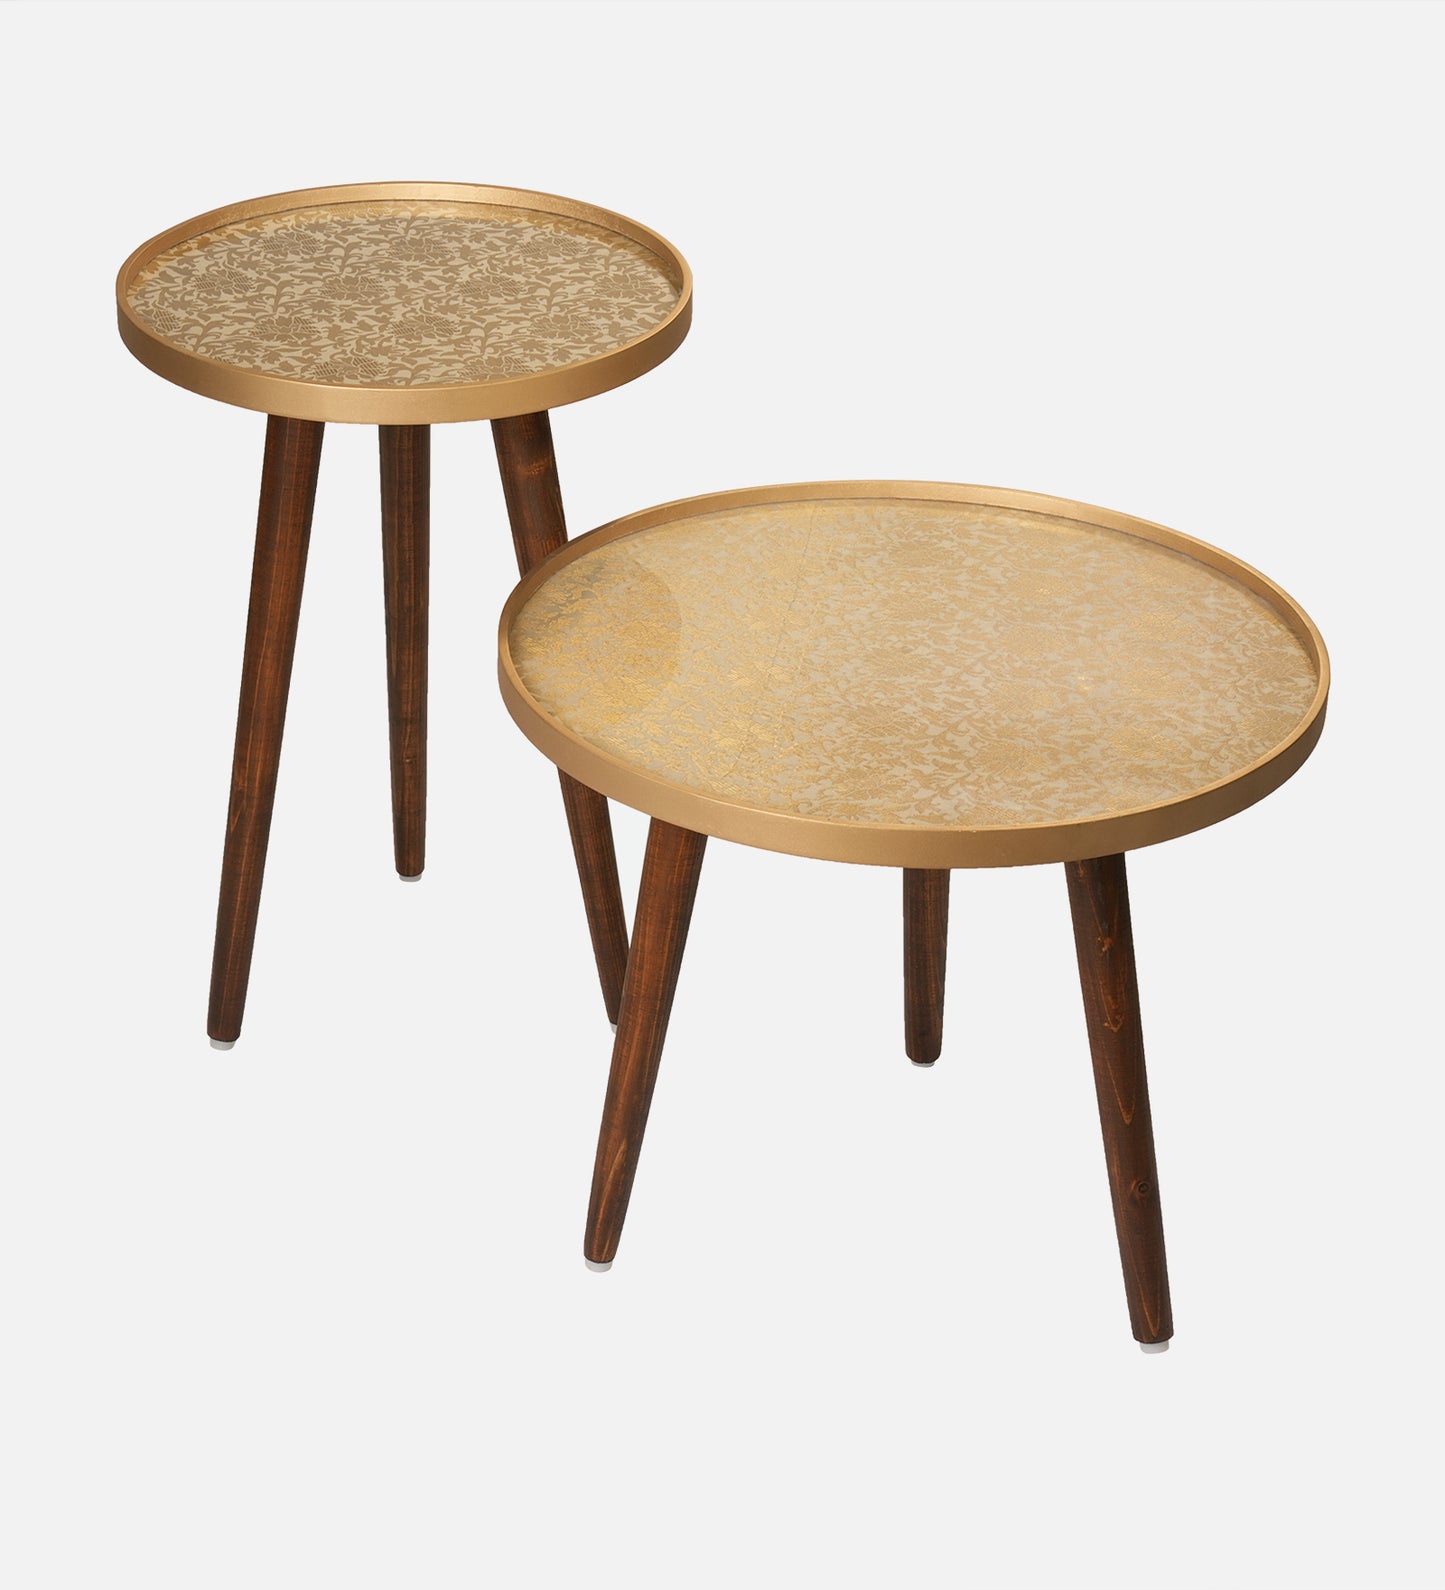 Banarasi Inverse Round Nesting Tables with Wooden Legs, Side Tables, Wooden Tables, Living Room Decor by A Tiny Mistake